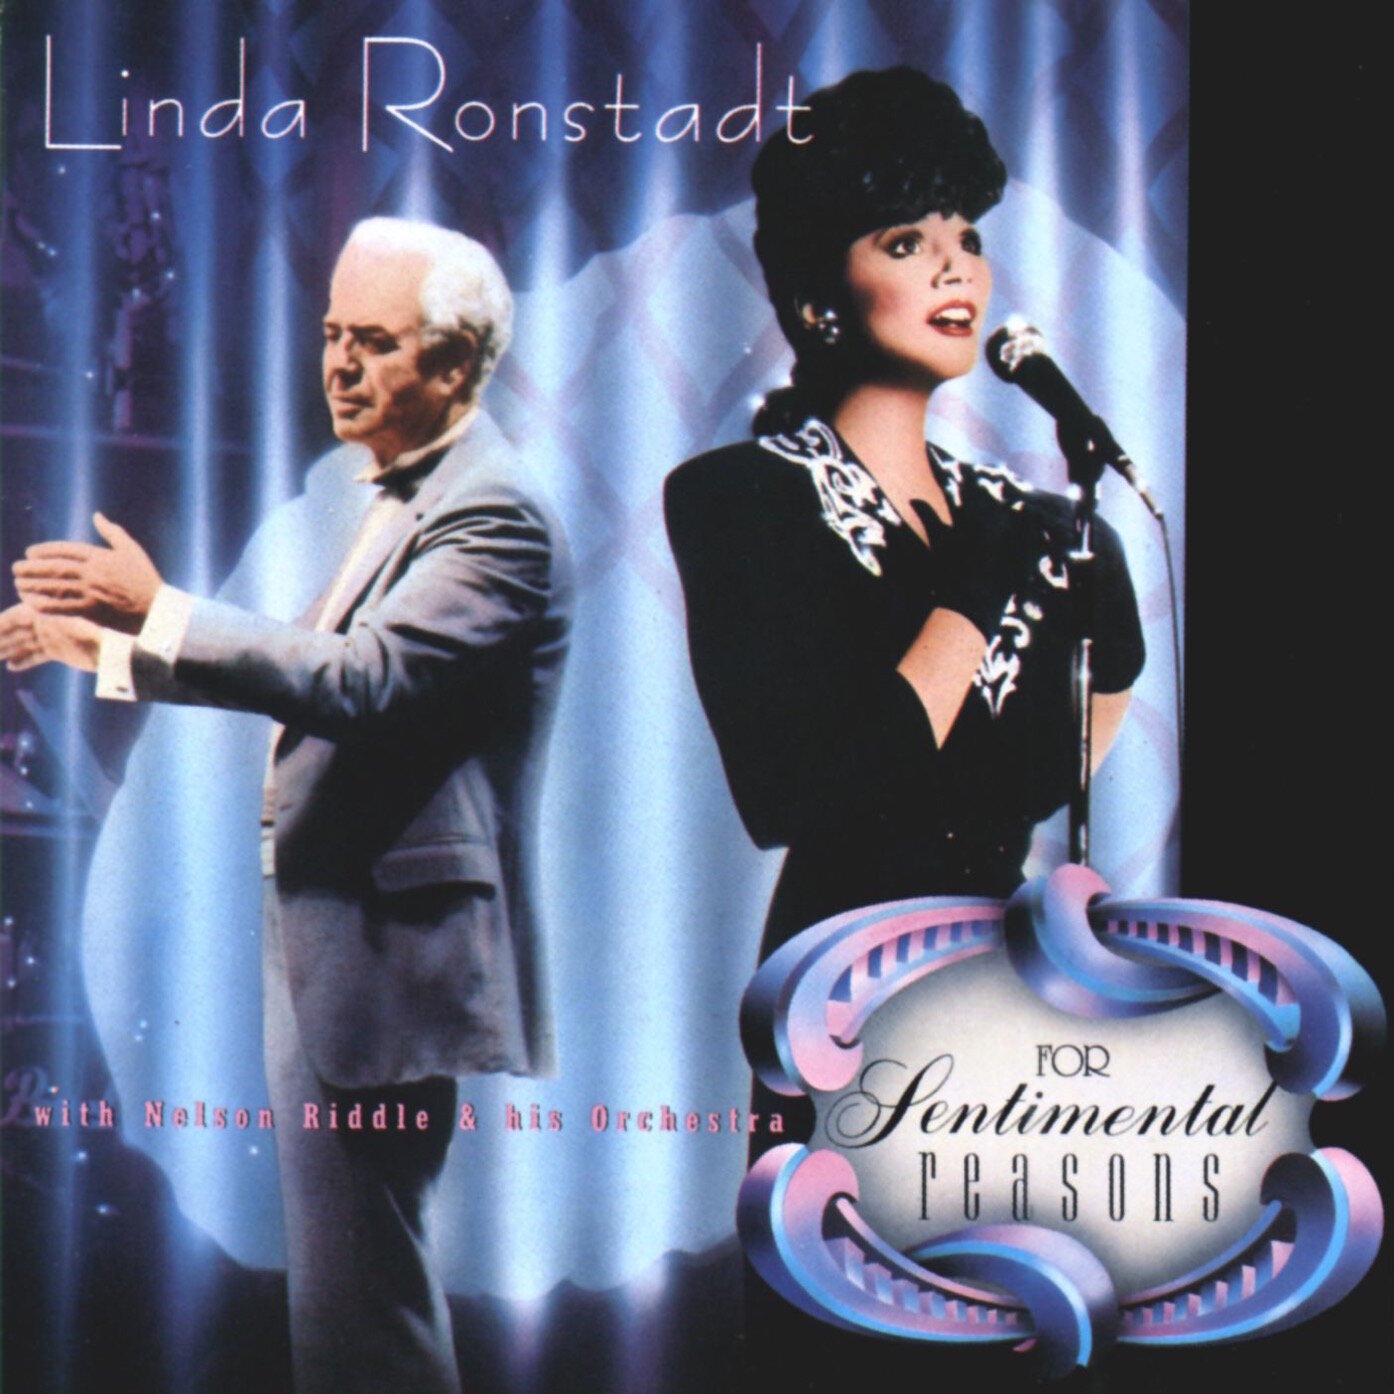 (40) For Sentimental Reasons - Linda Ronstadt and The Nelson Riddle Orchestra.jpg